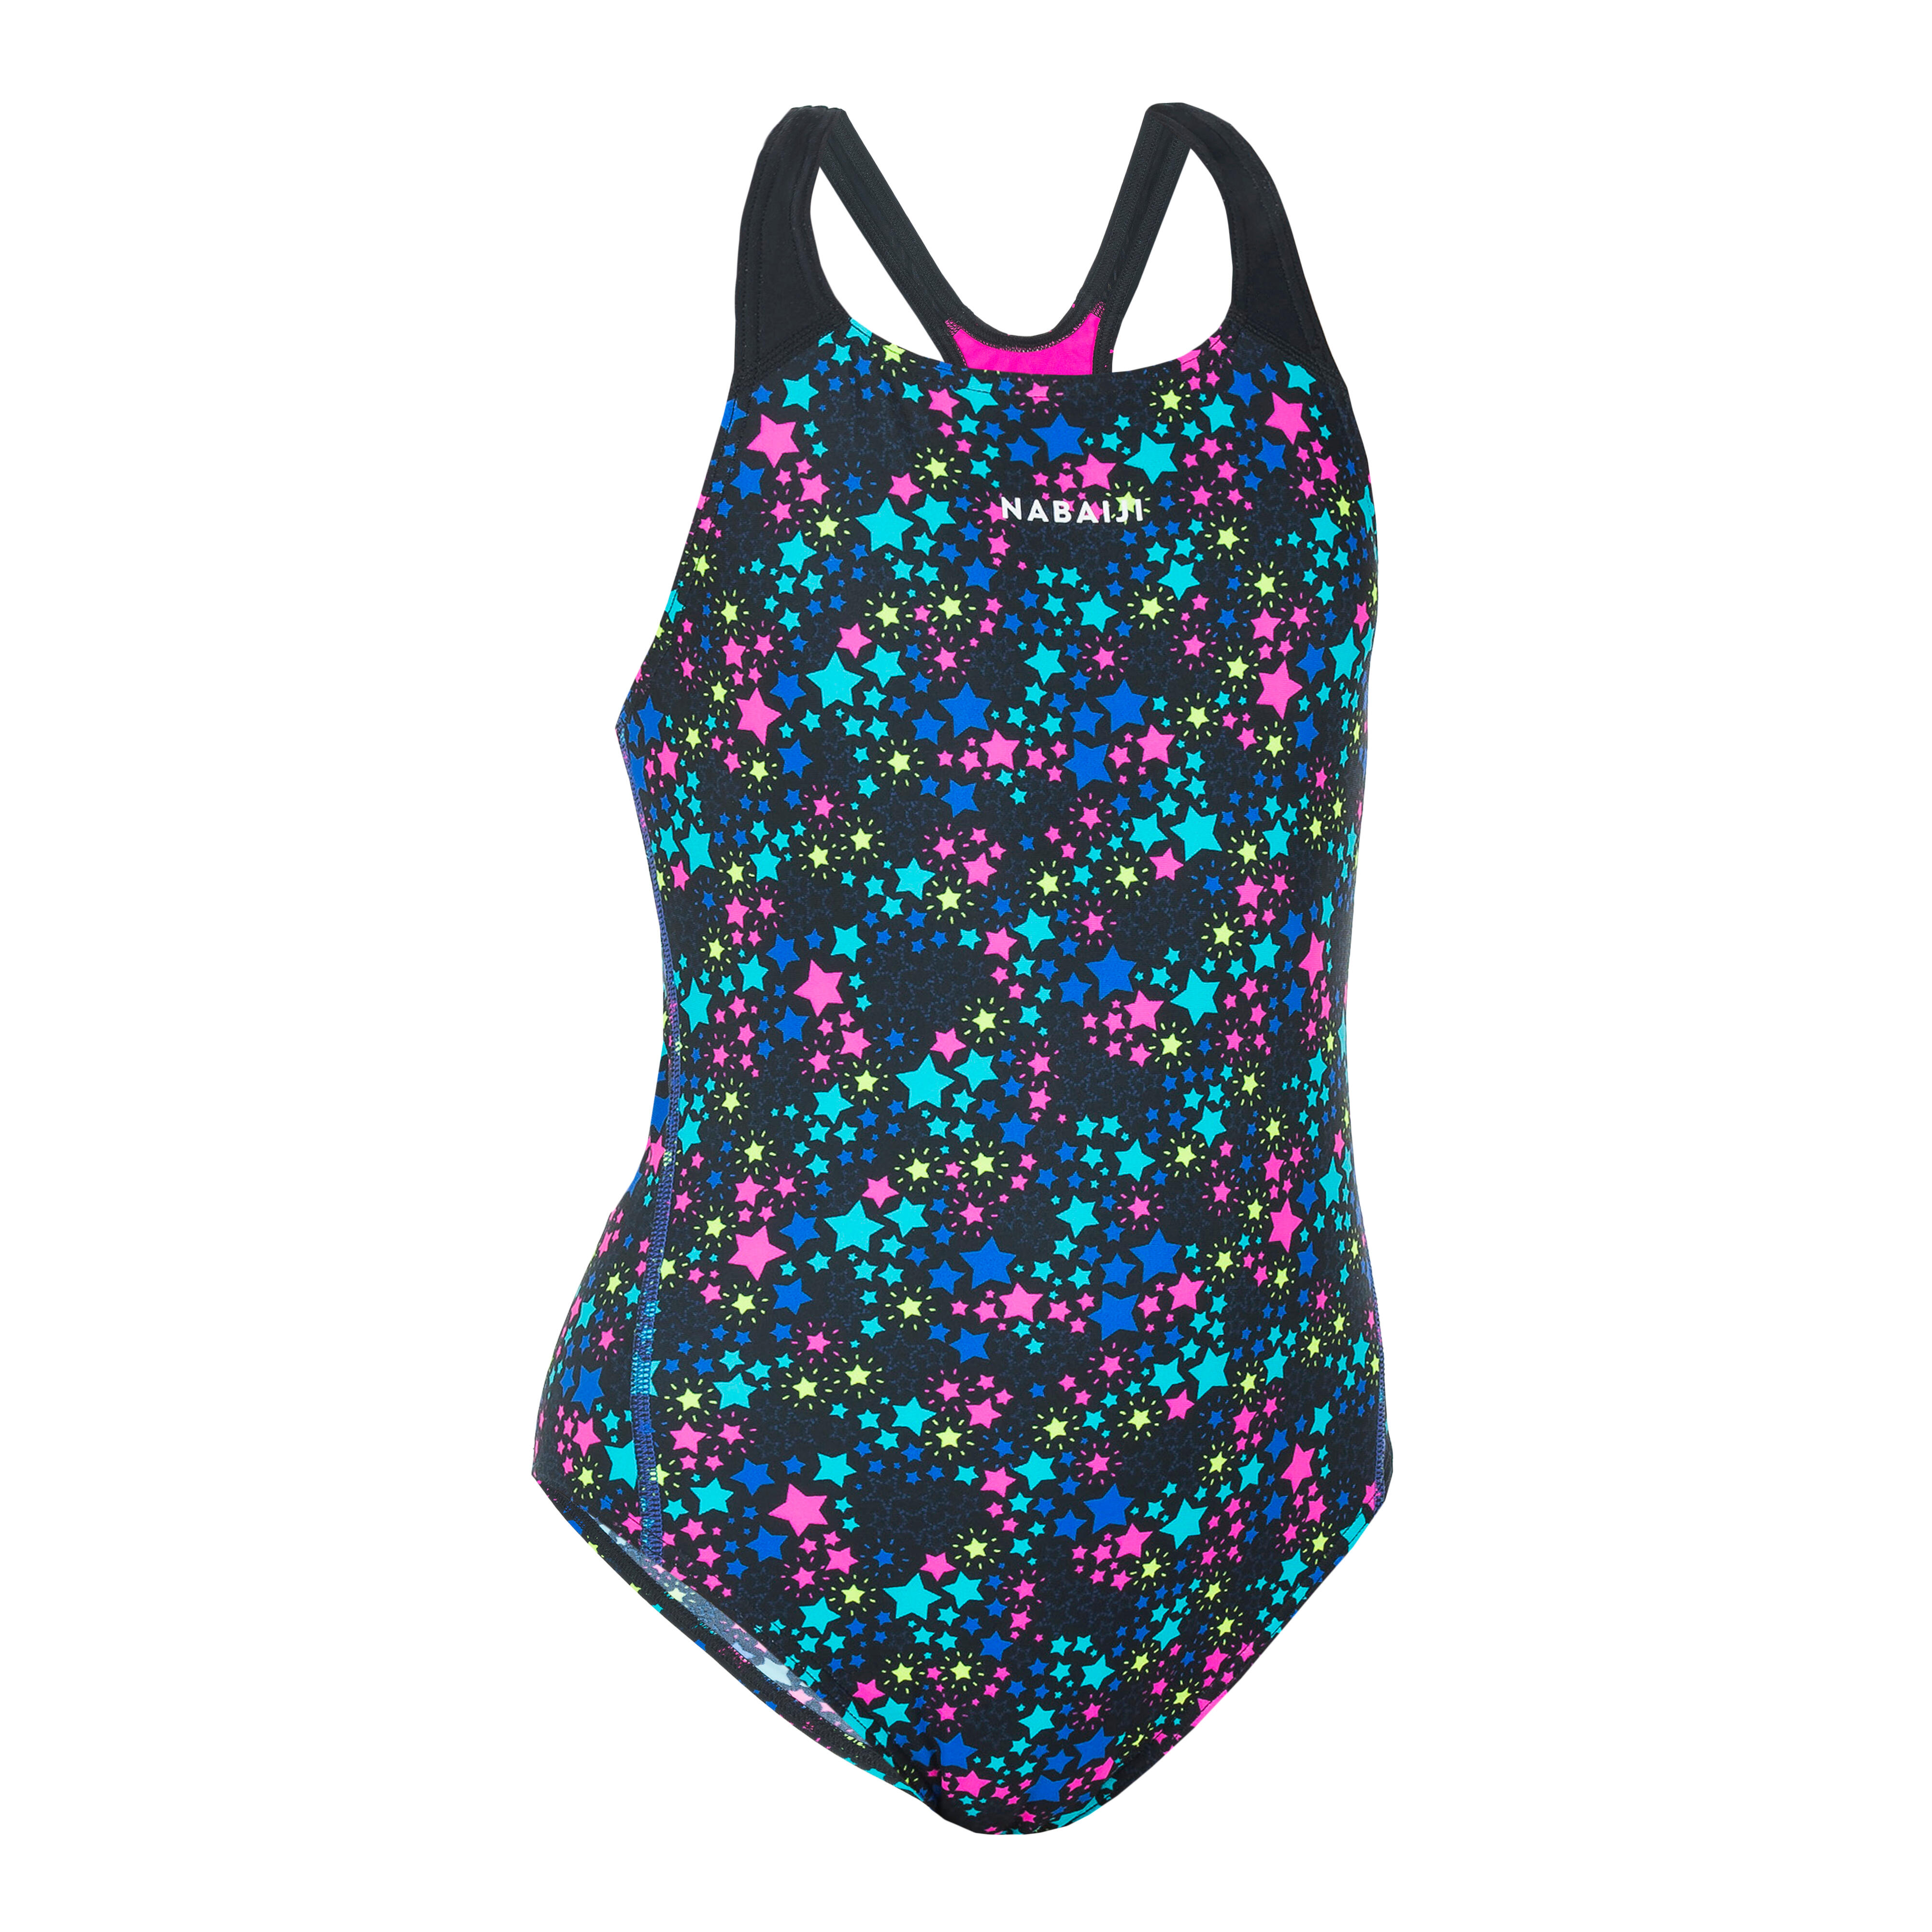 Quick dry / Aqua resist swimsuit material for girls & boys are